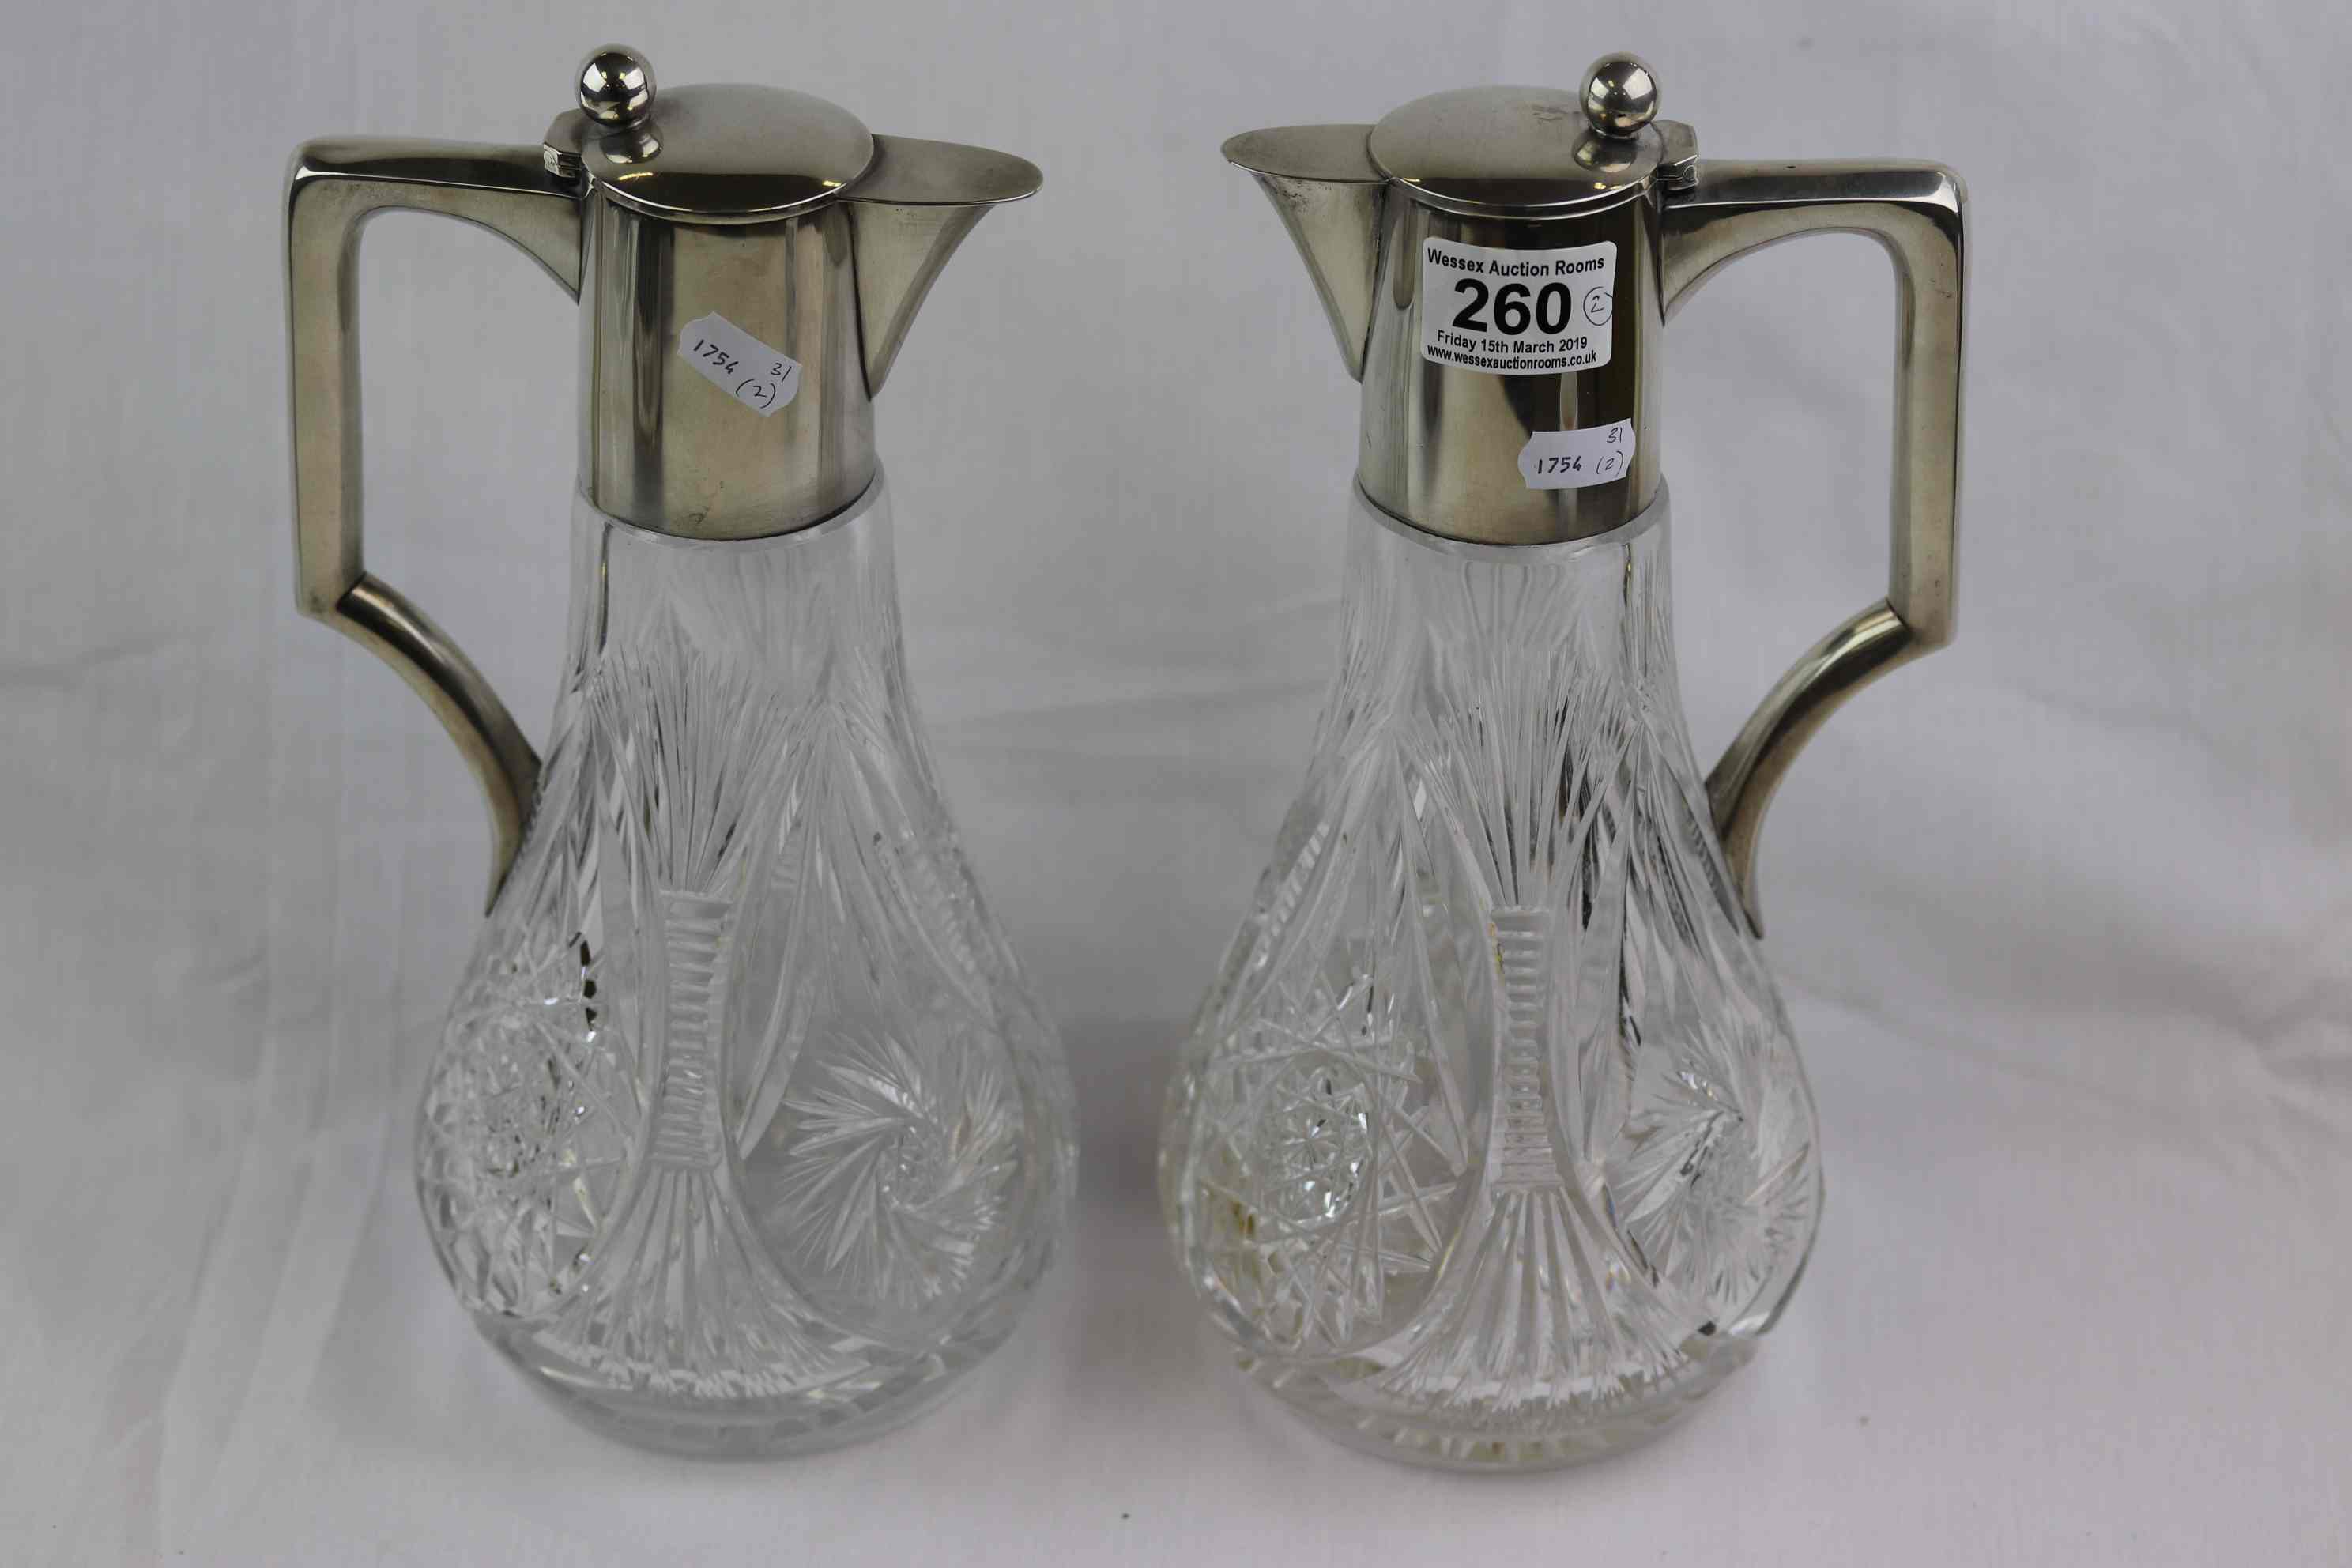 Pair of German silver mounted cut glass claret jugs, plain polished collar, hinged lid and handle, - Image 2 of 4